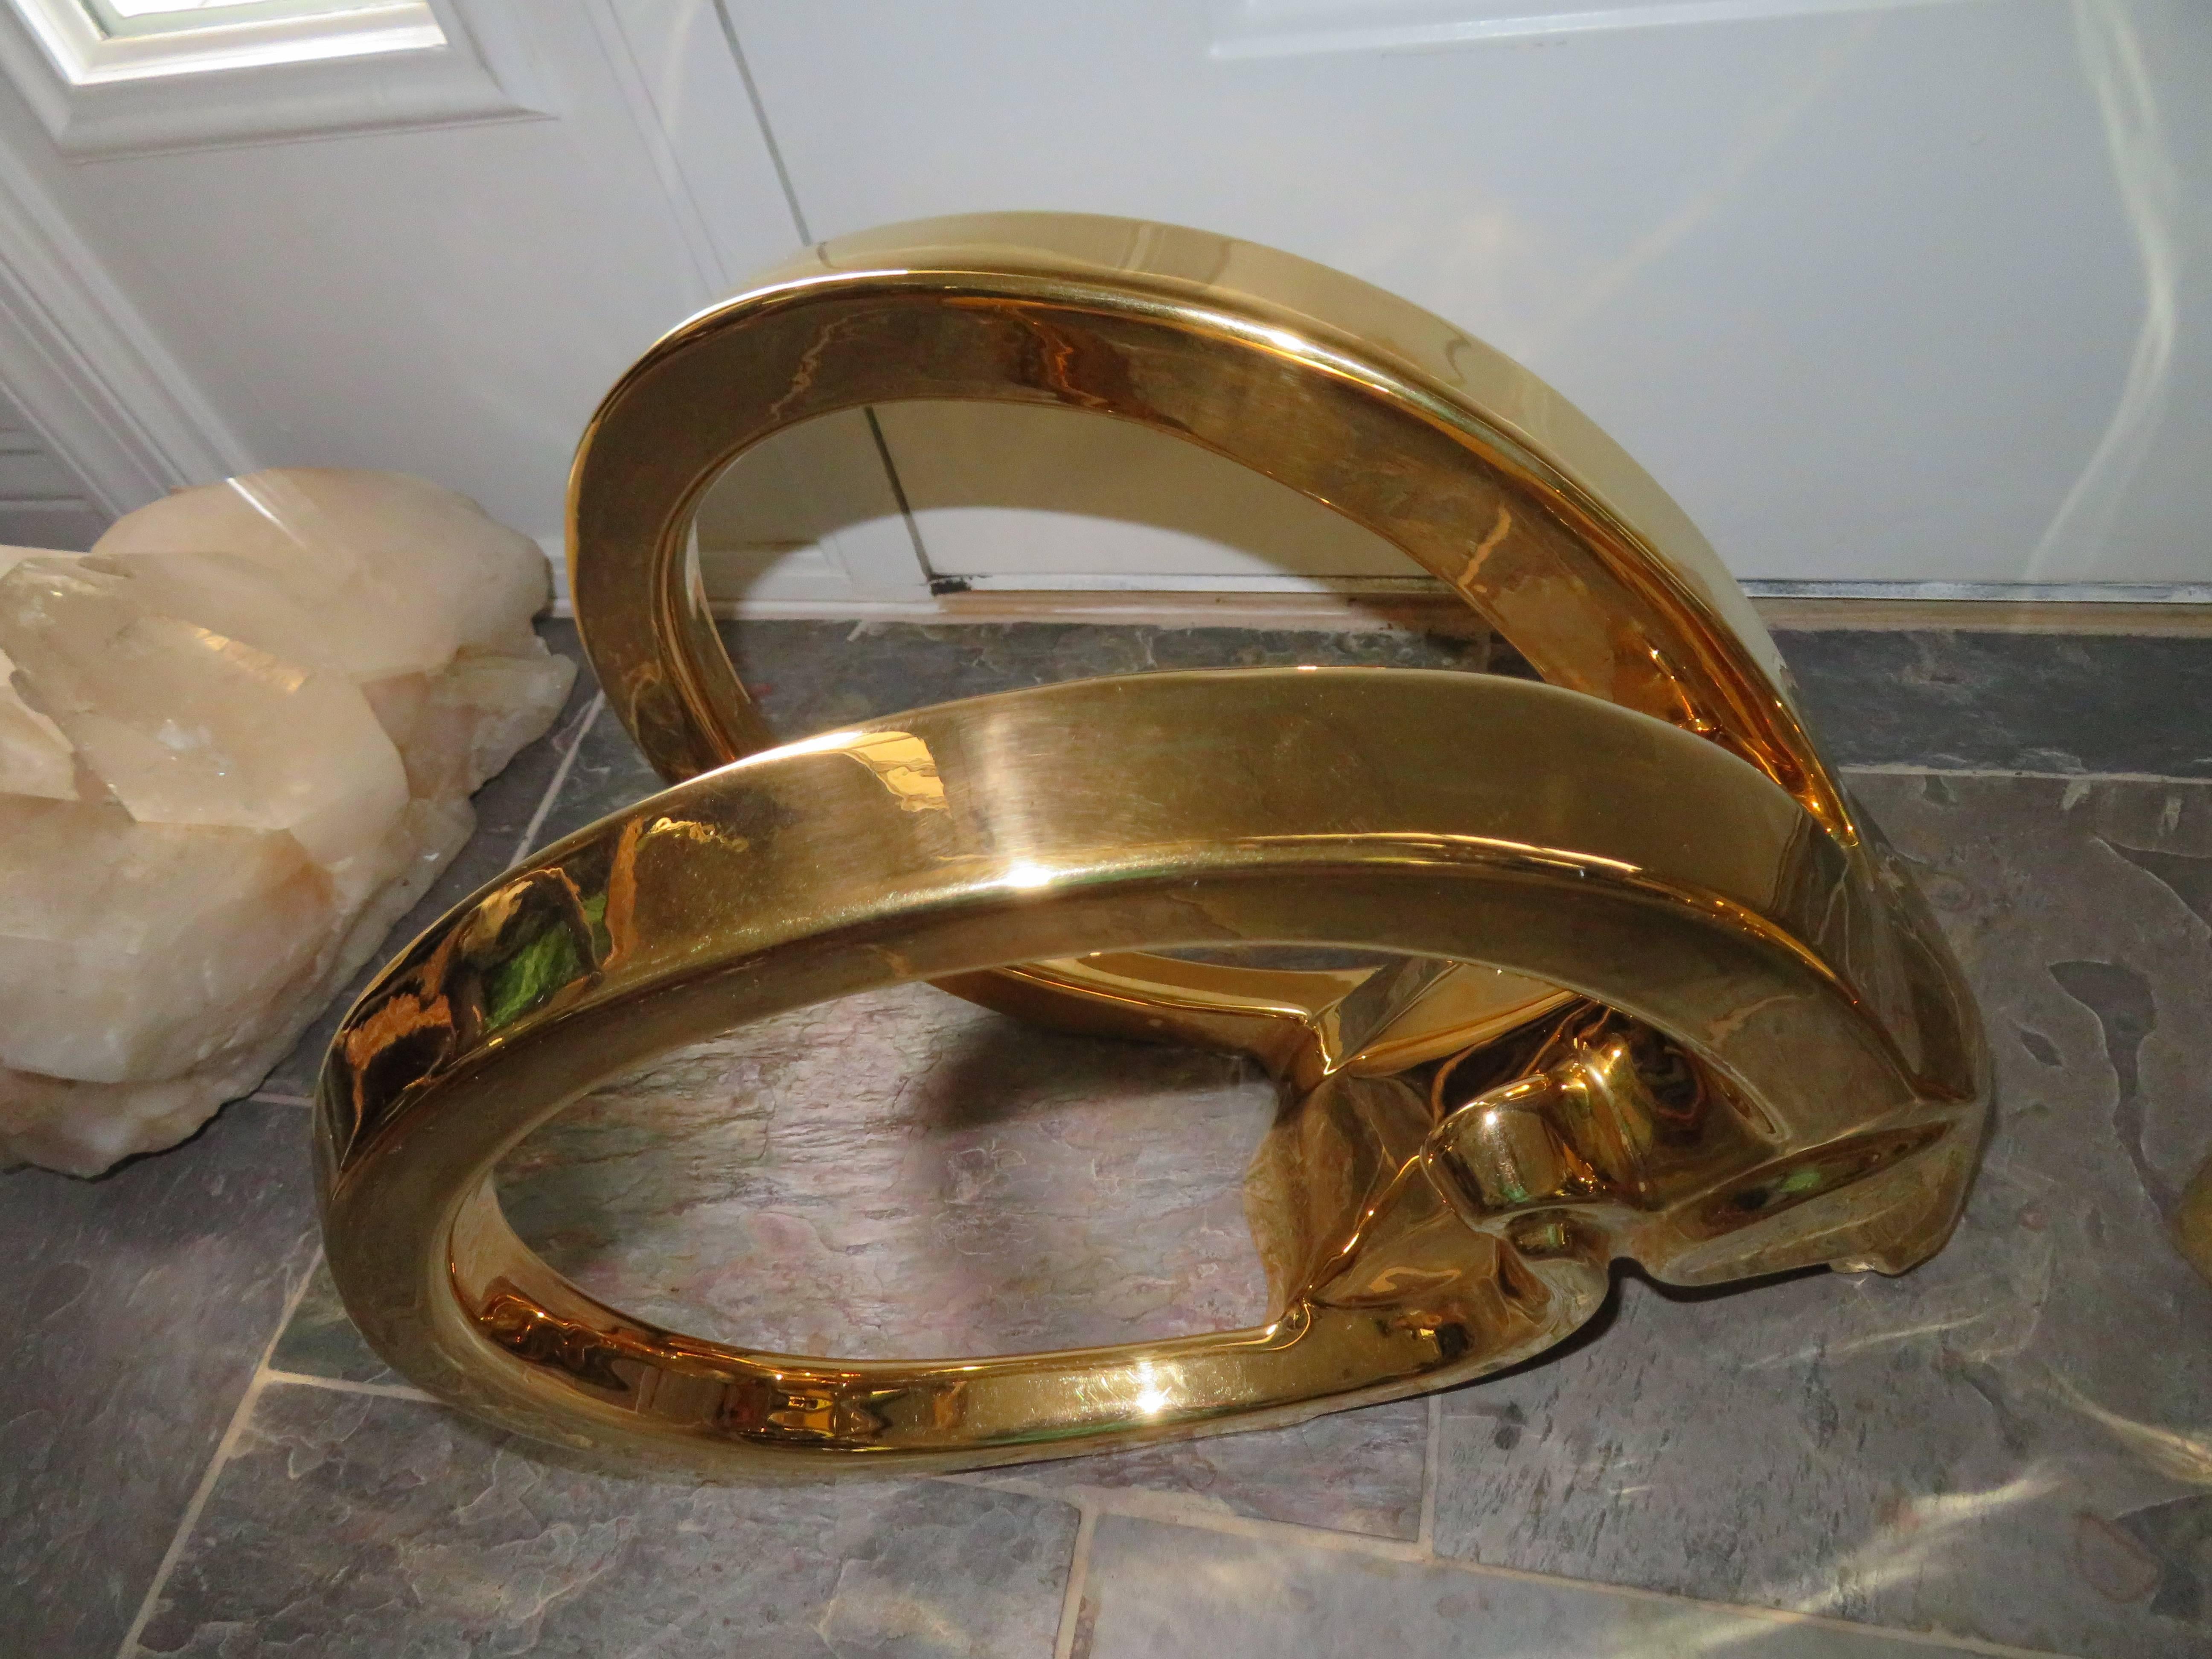 Glamorous Pair of Signed Jaru 18kt Gold Ram Sculptures Mid-Century Modern In Good Condition For Sale In Pemberton, NJ